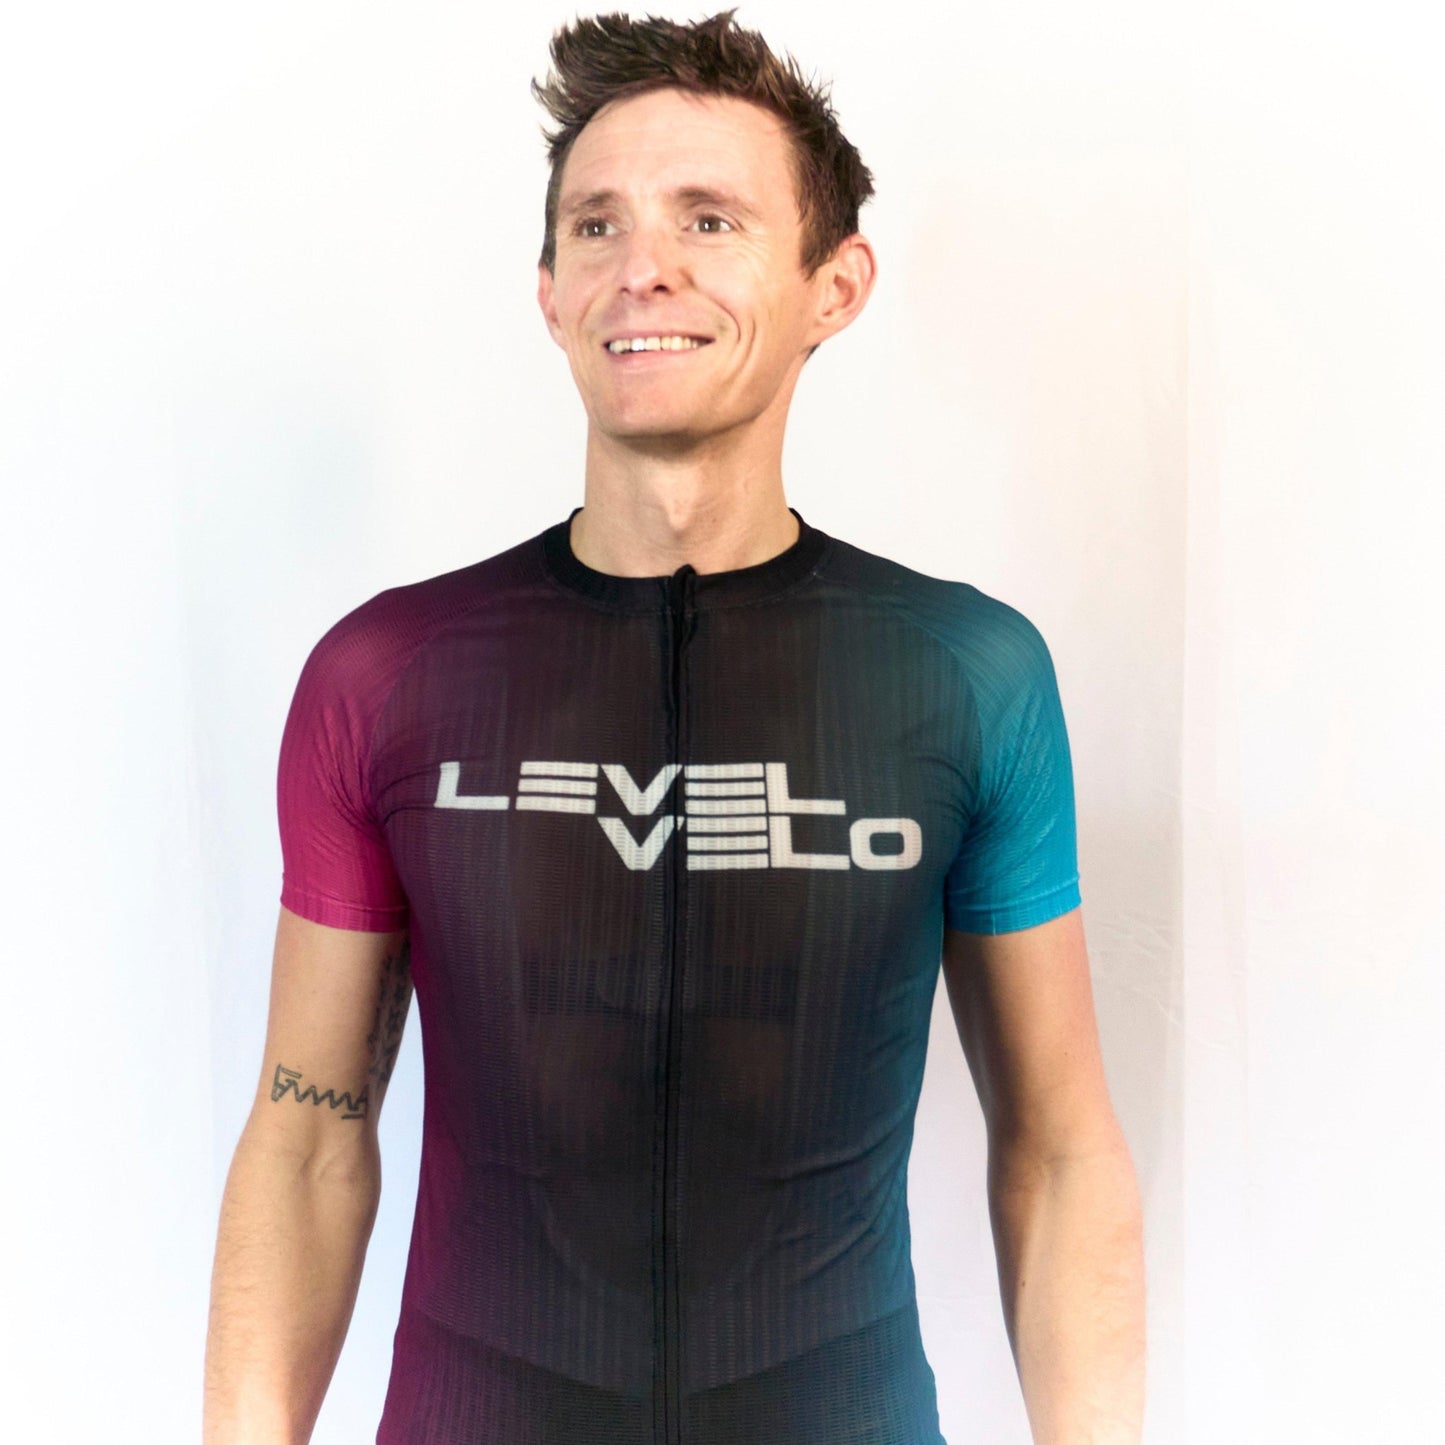 LEVEL 61 TRON Indoor Cycling Jersey - Version 1 - LEVEL VELO